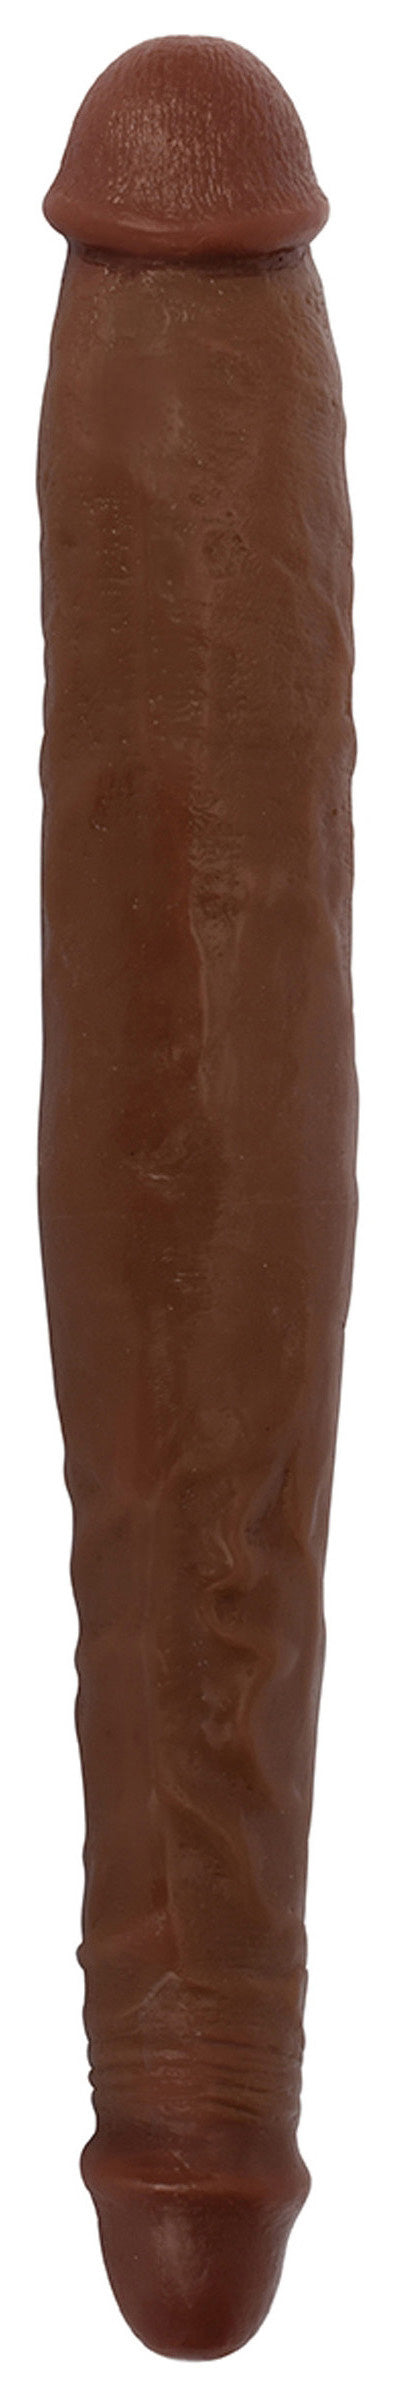 JOCK 13 Inch Tapered Double Dong Brown - CN-09-0402-11 - UPC-642610430756